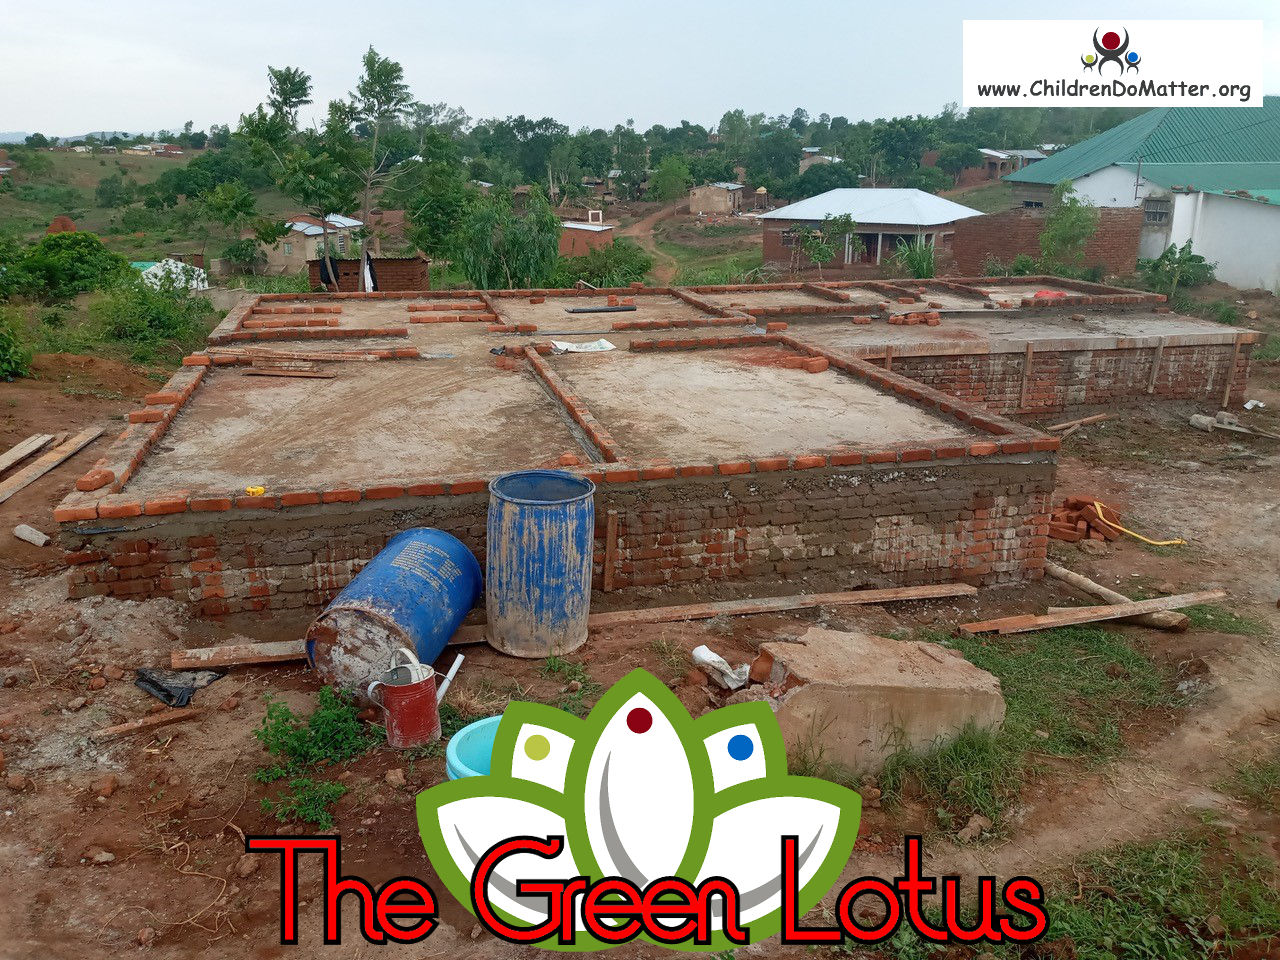 the making of the green lotus orphanage in blantyre malawi - children do matter - 9